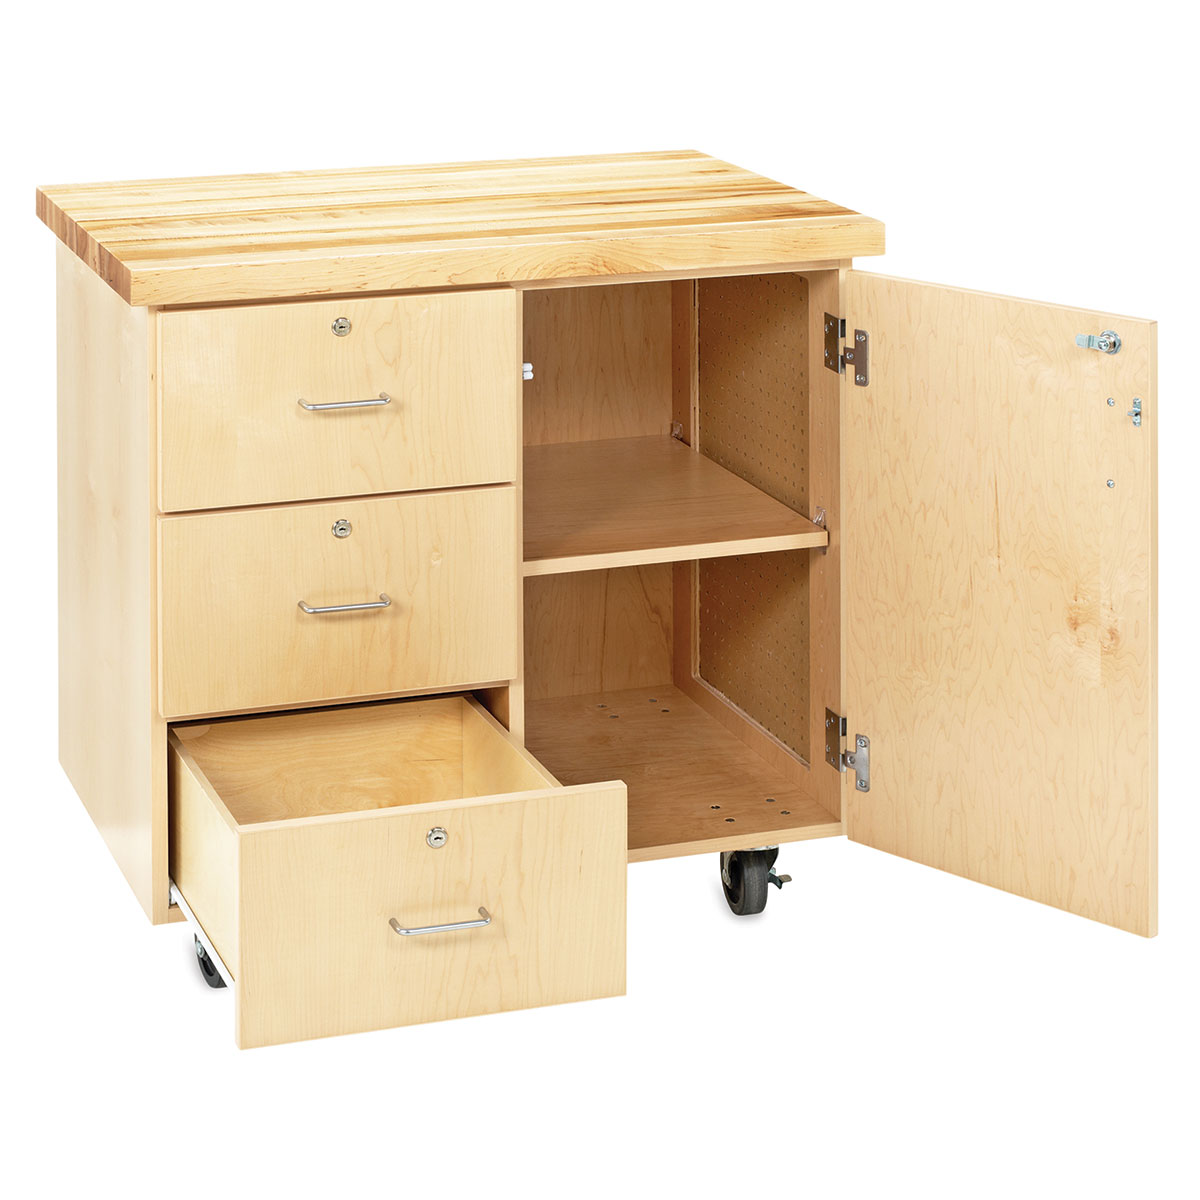 Perspective 24 Student Drawing Supply Cabinet - Diversified DTC-24